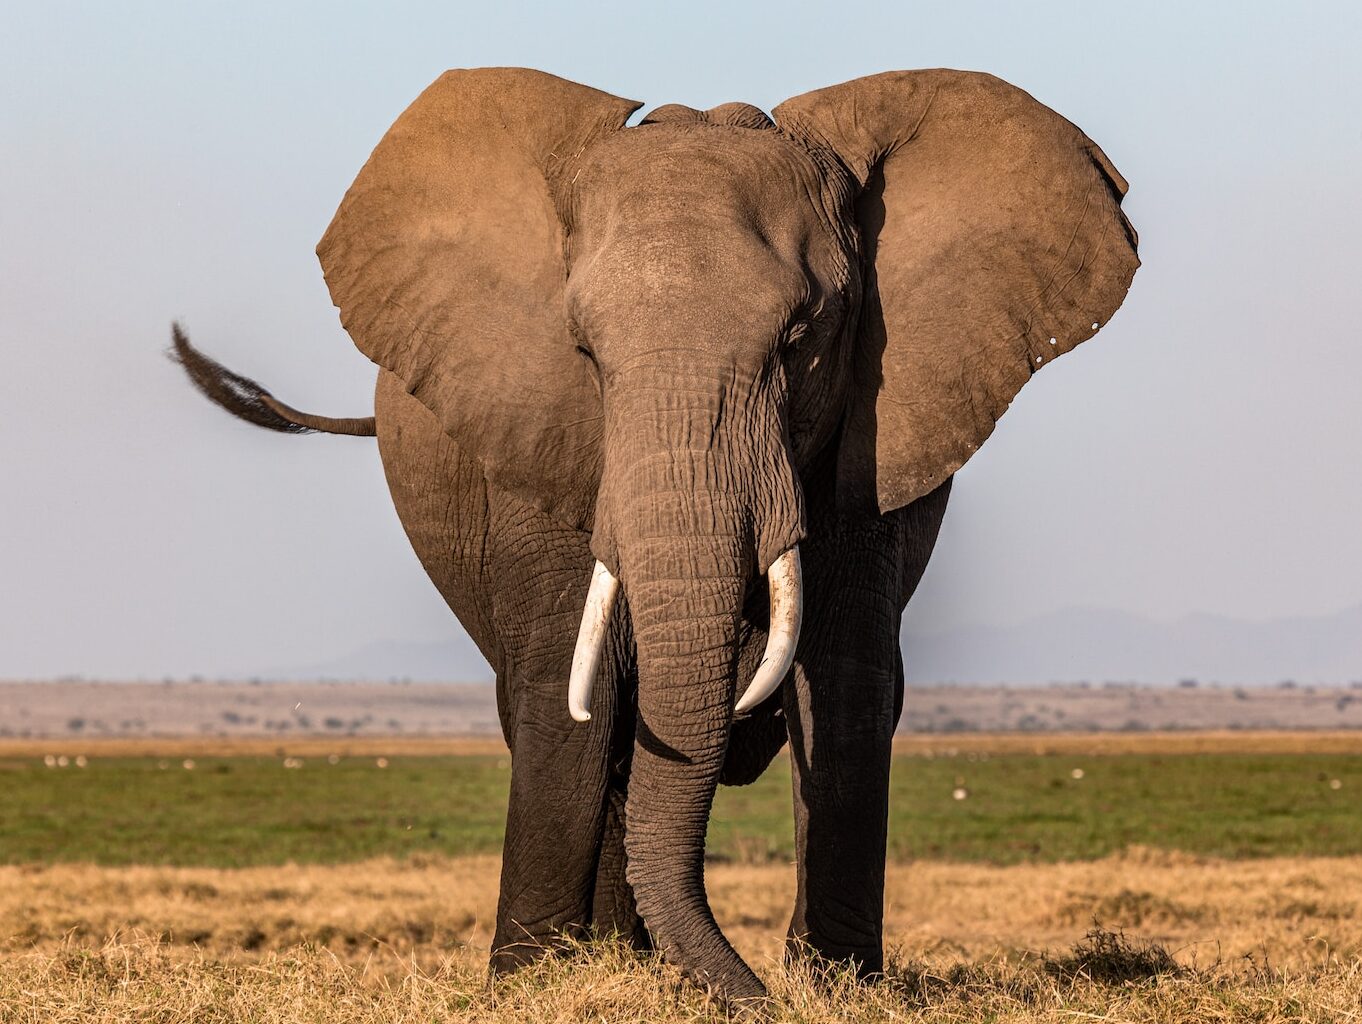 a large elephant standing in a dry grass field